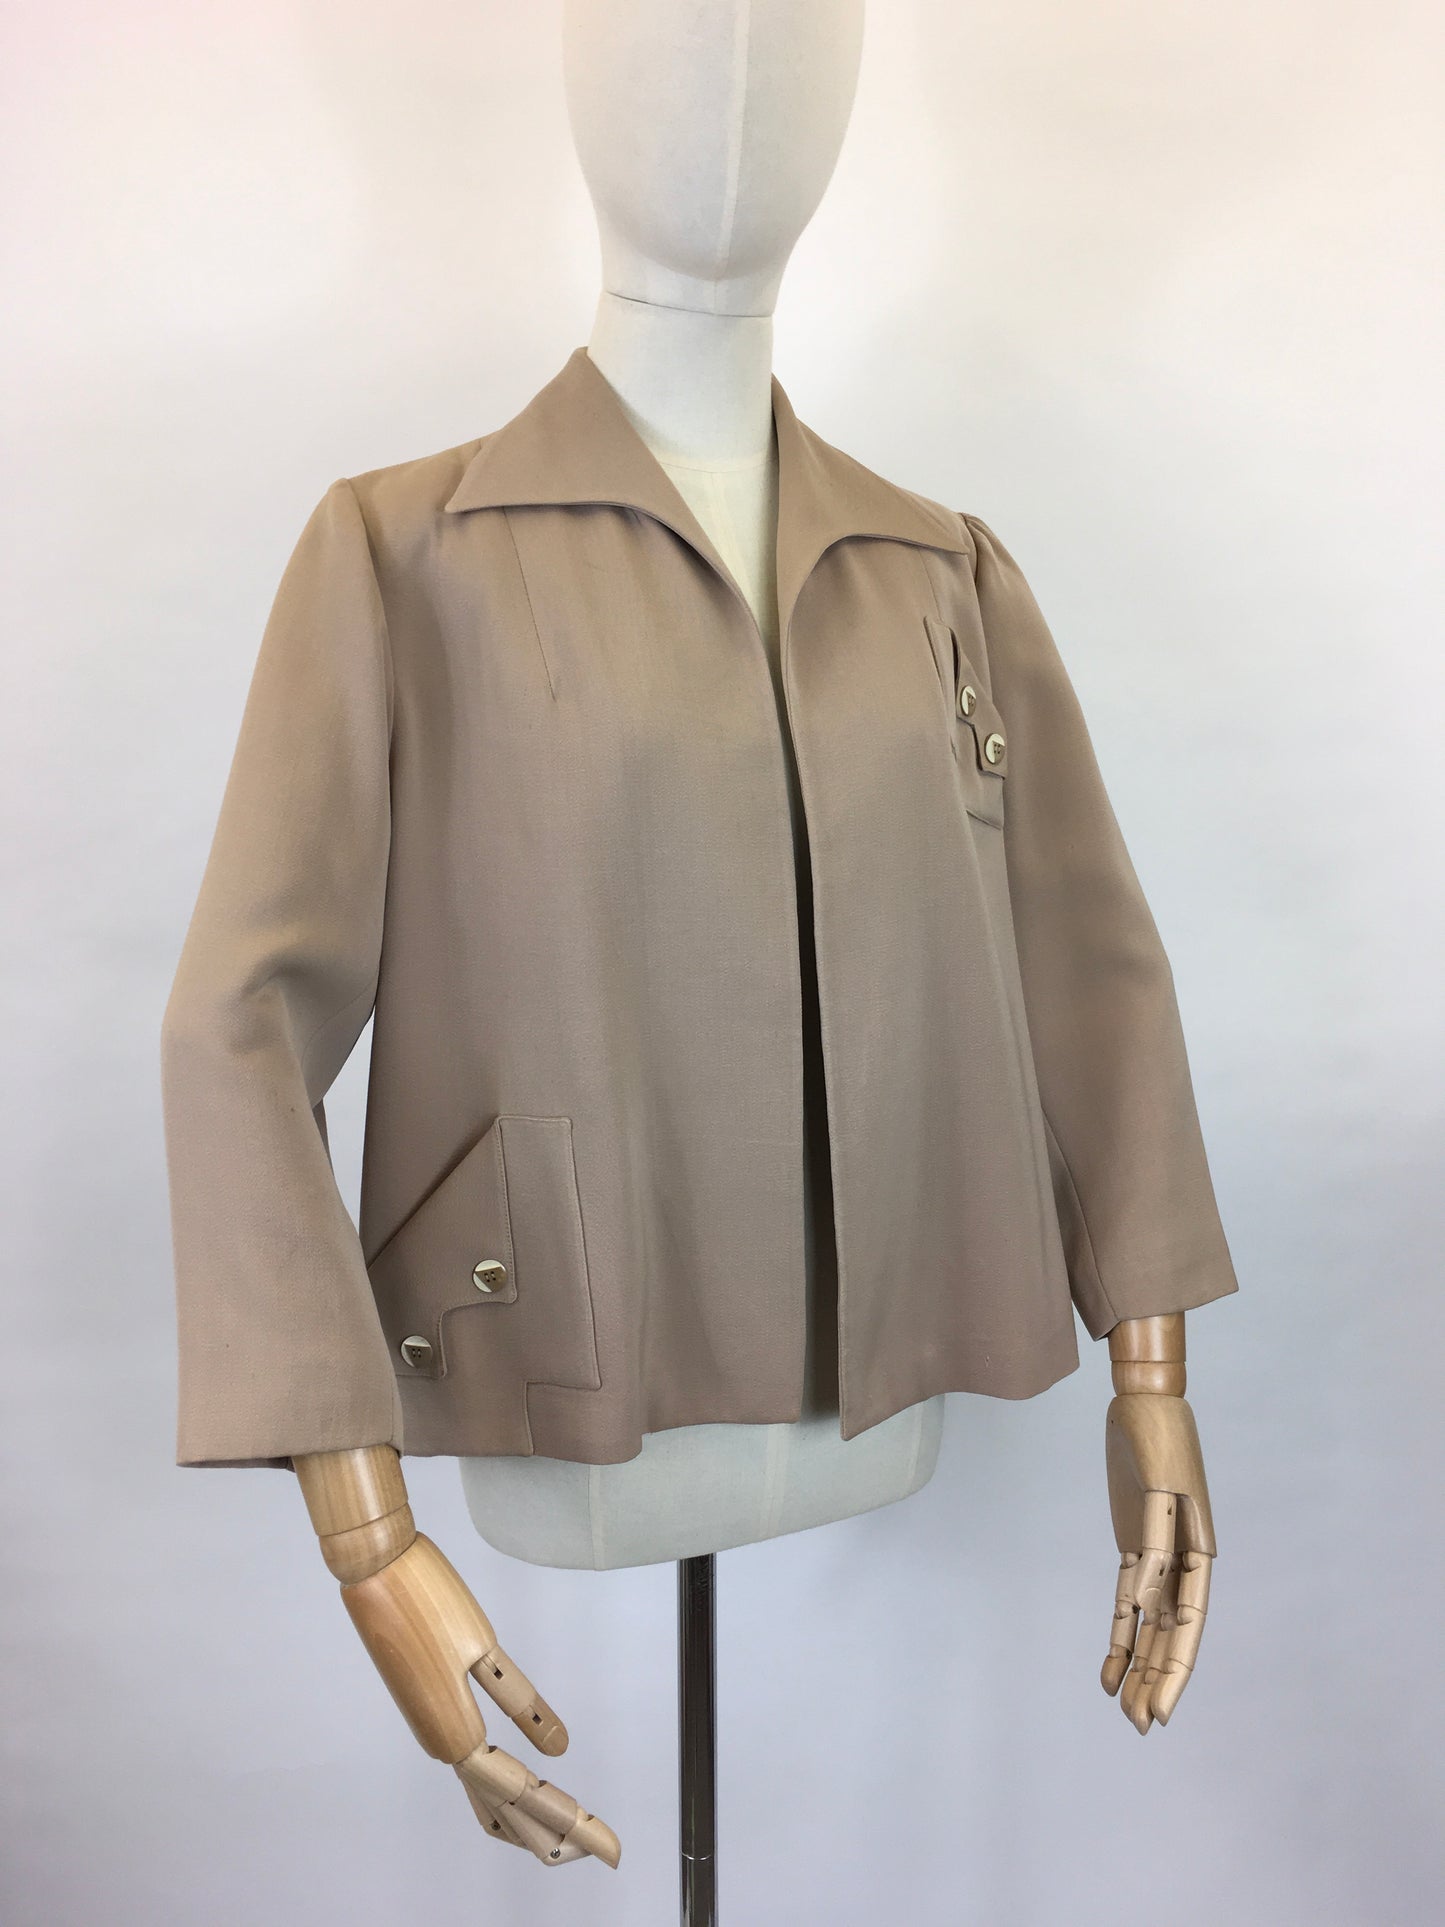 Original 1940s American Edge to Edge Swing Jacket - In a Lovely Warm Taupe